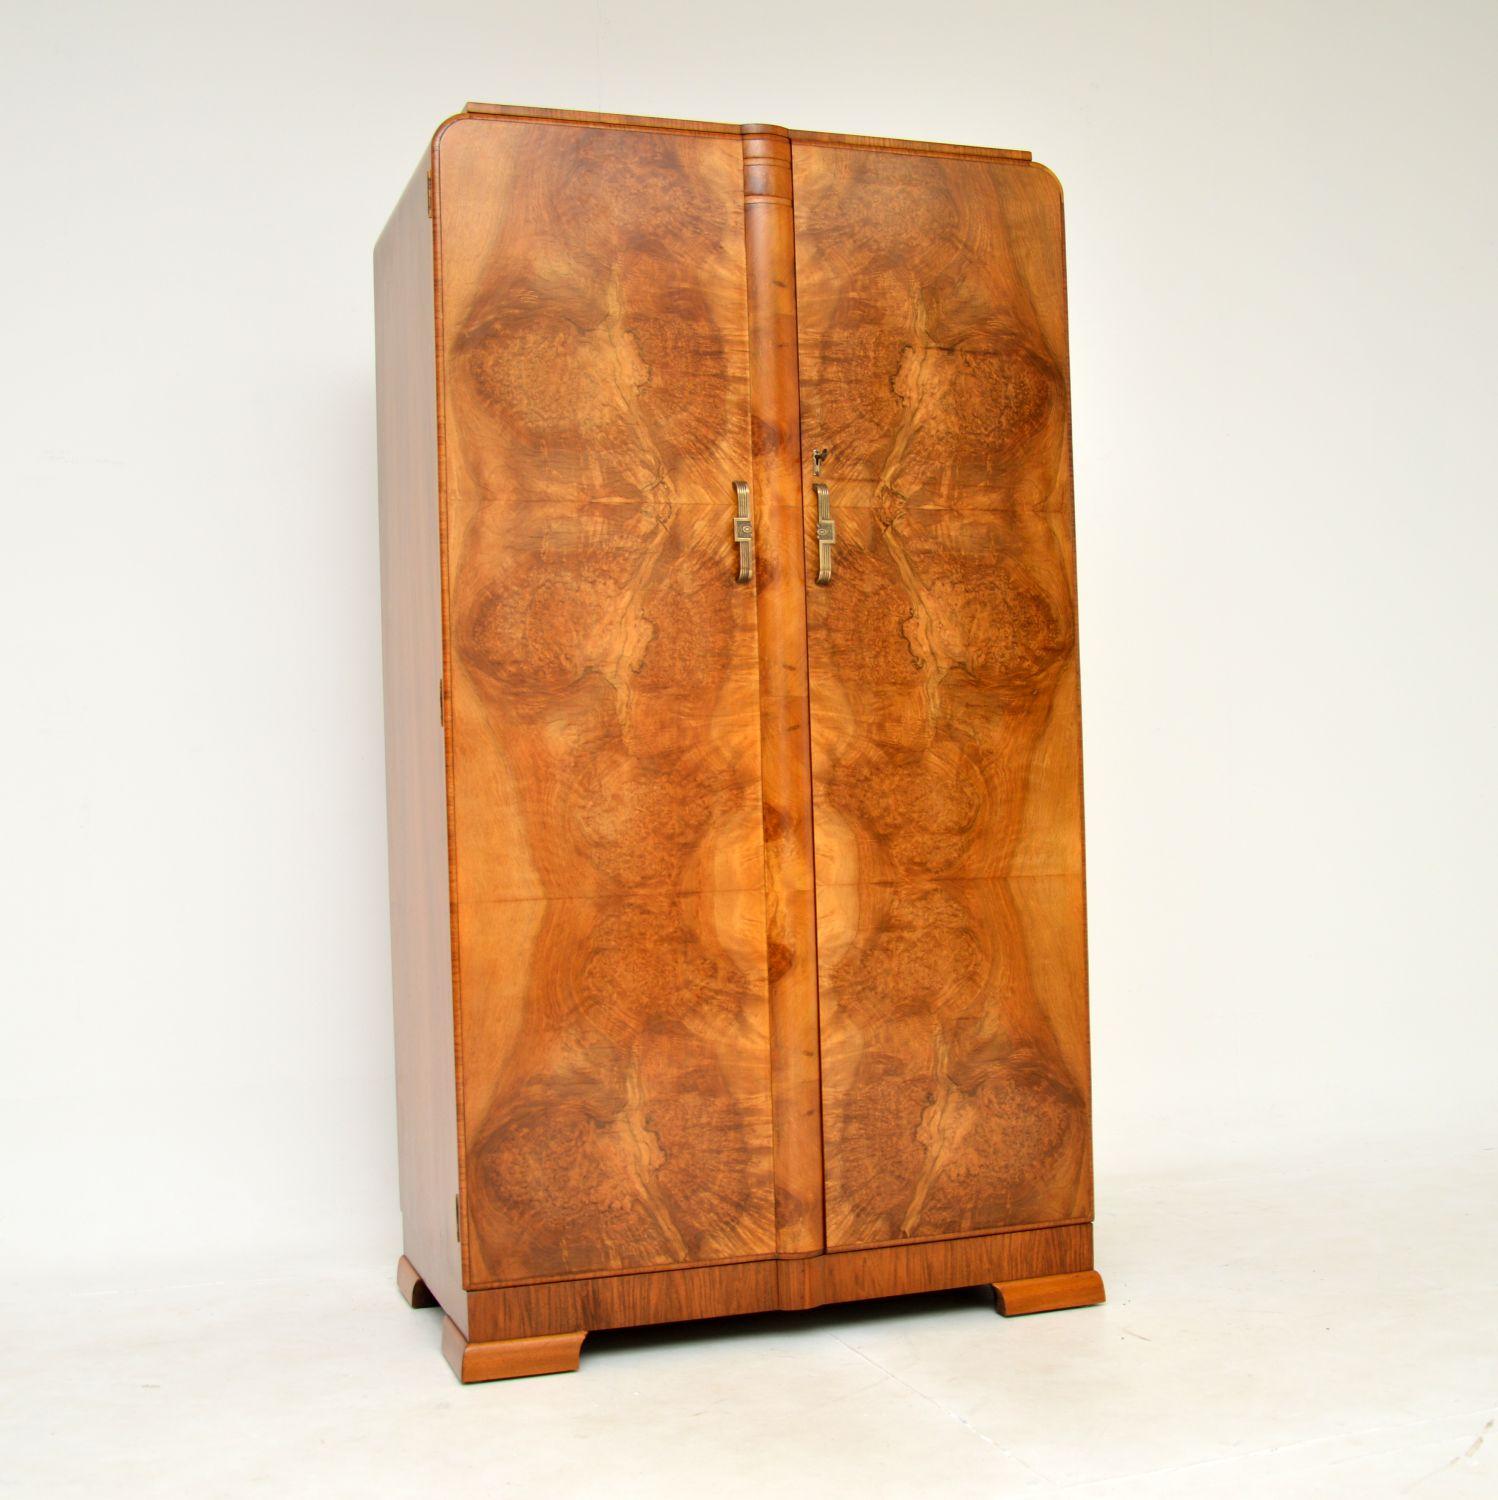 A stunning original Art Deco period compactum wardrobe in walnut. This was made in England, it dates from the 1930’s.

The quality is superb, this has a gorgeous design and is a very useful size. There are amazing burr walnut grain patterns, this